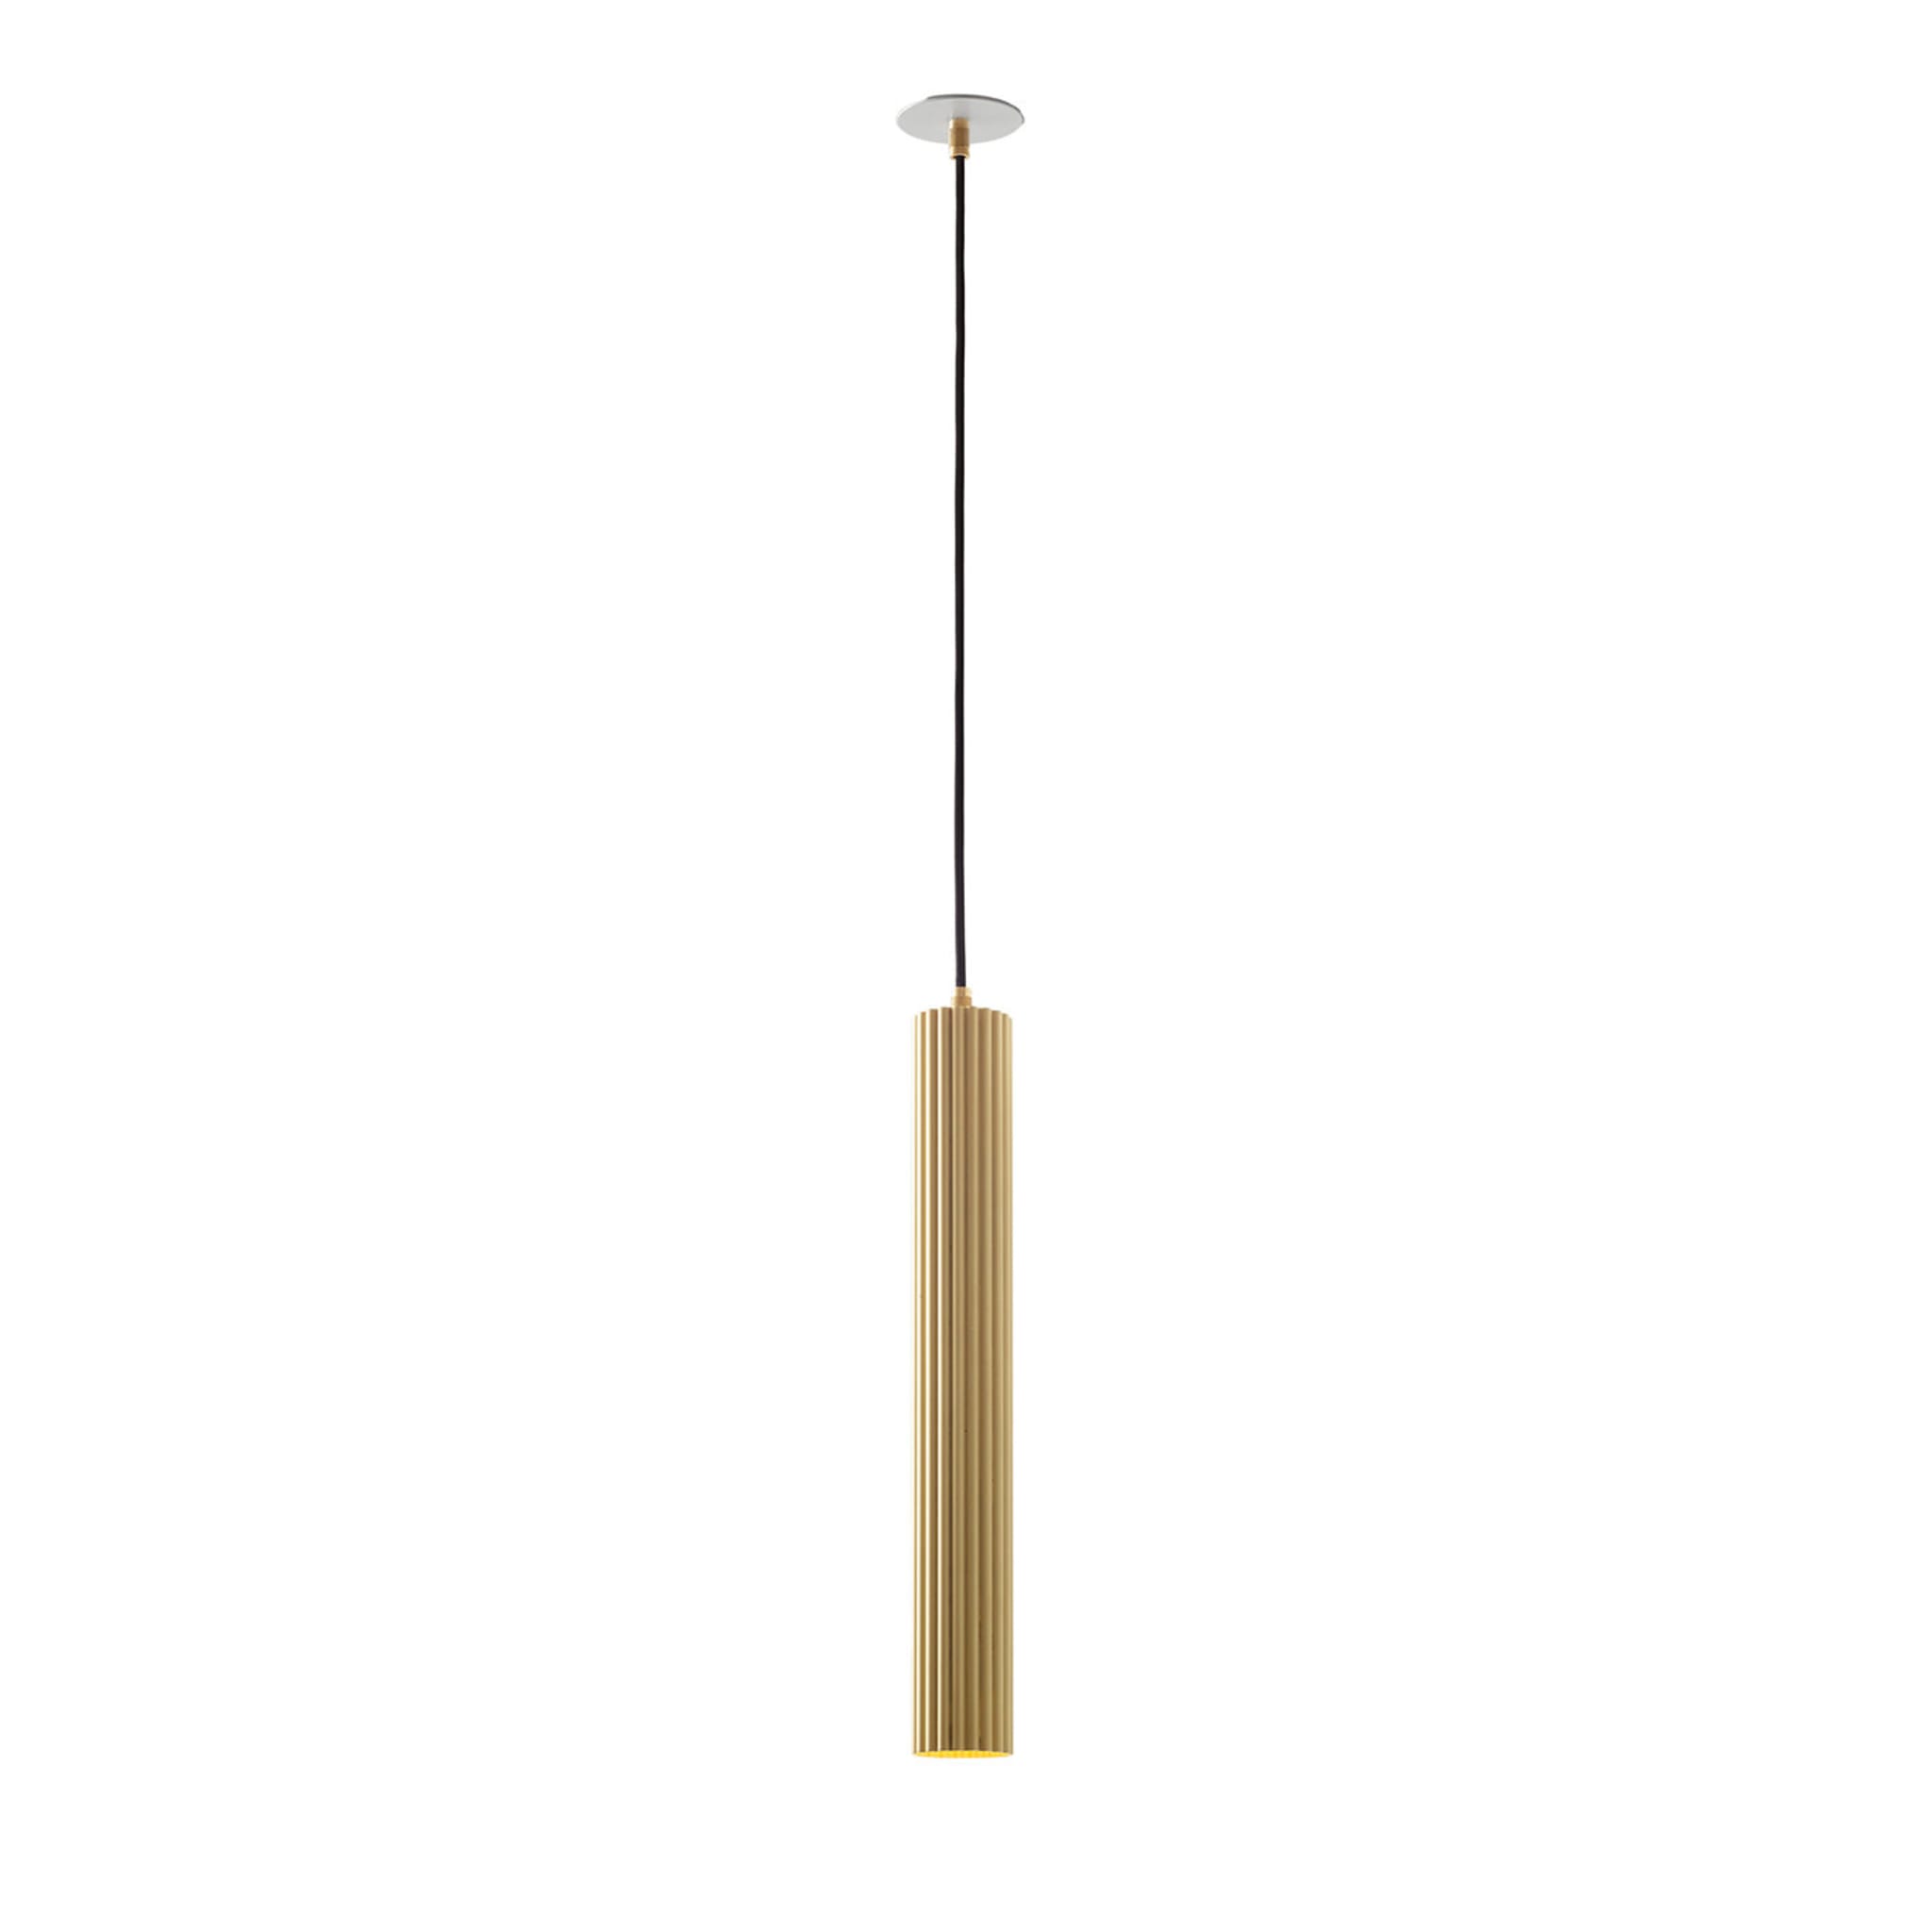 Lustrin Striped Pendant Lamp by Isacco Brioschi - Main view